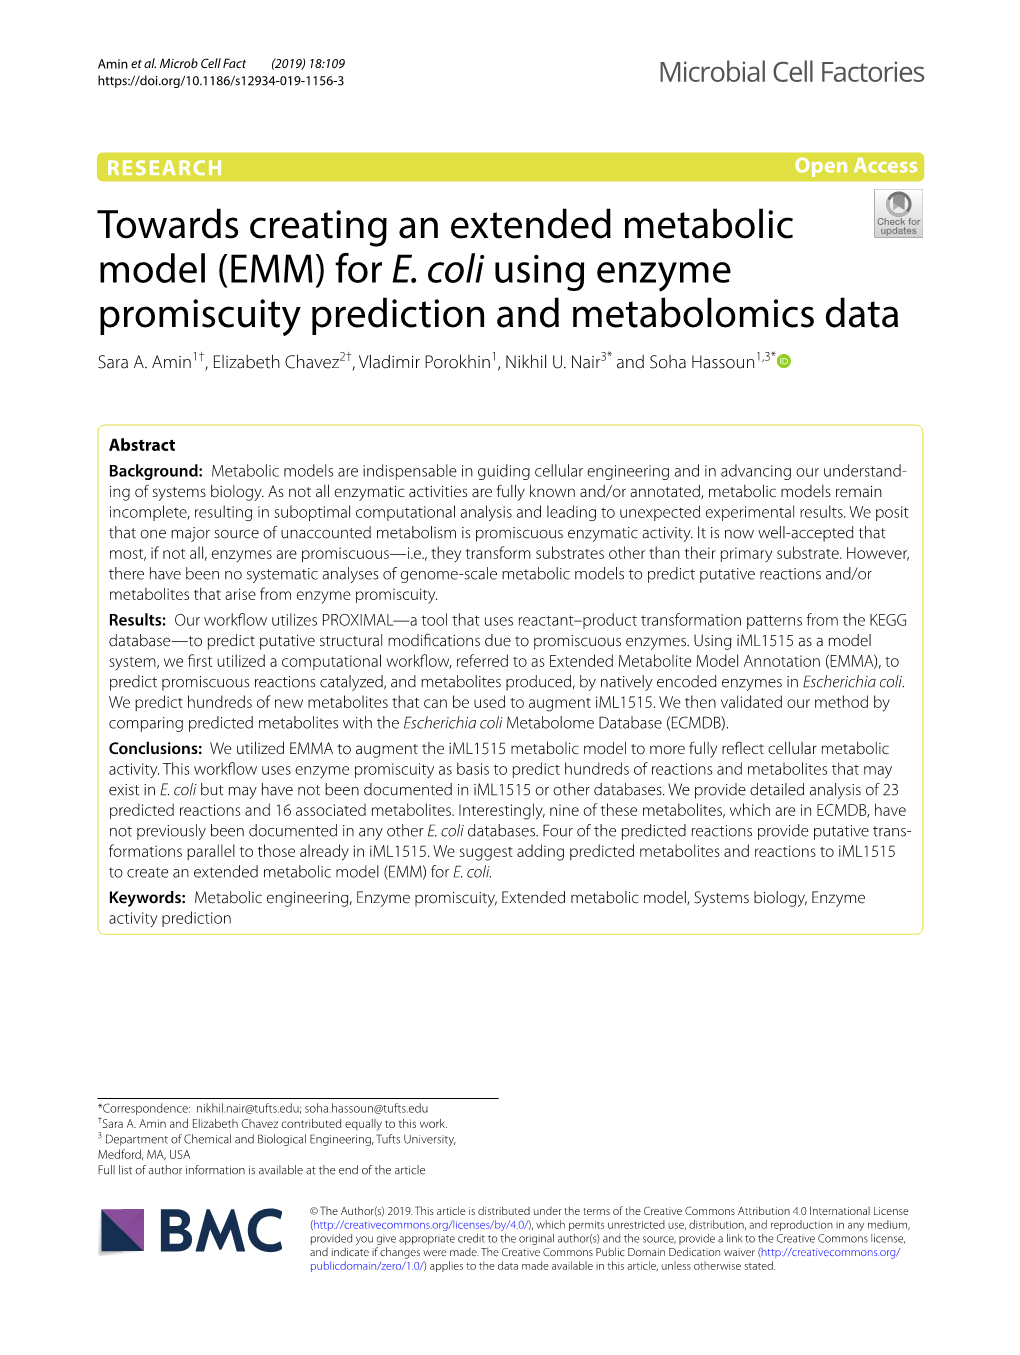 For E. Coli Using Enzyme Promiscuity Prediction and Metabolomics Data Sara A